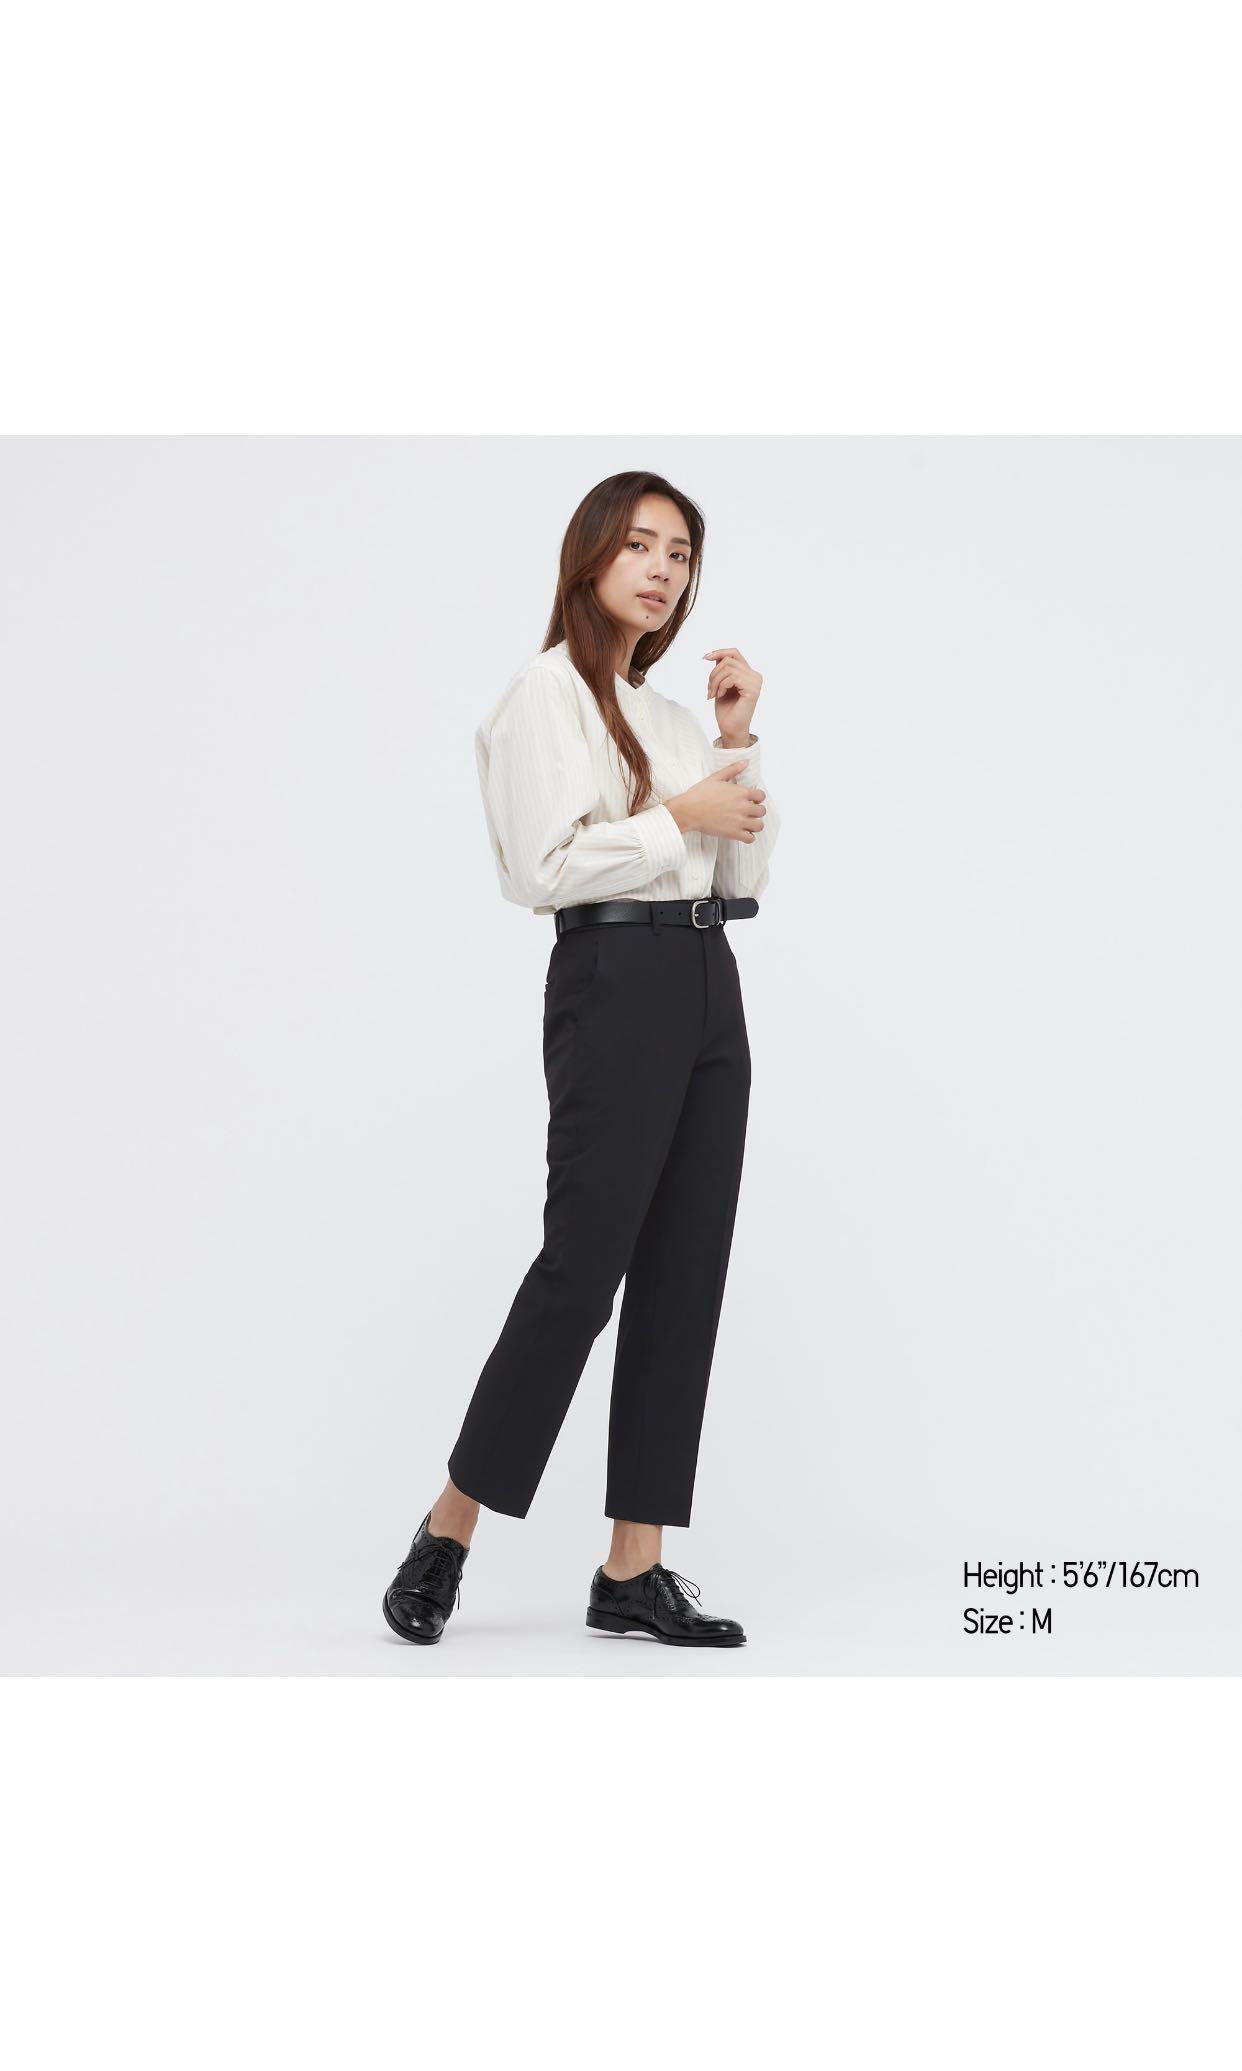 UNIQLO Smart Ankle Pants 2way Stretch Black, Women's Fashion, Bottoms, Jeans  & Leggings on Carousell